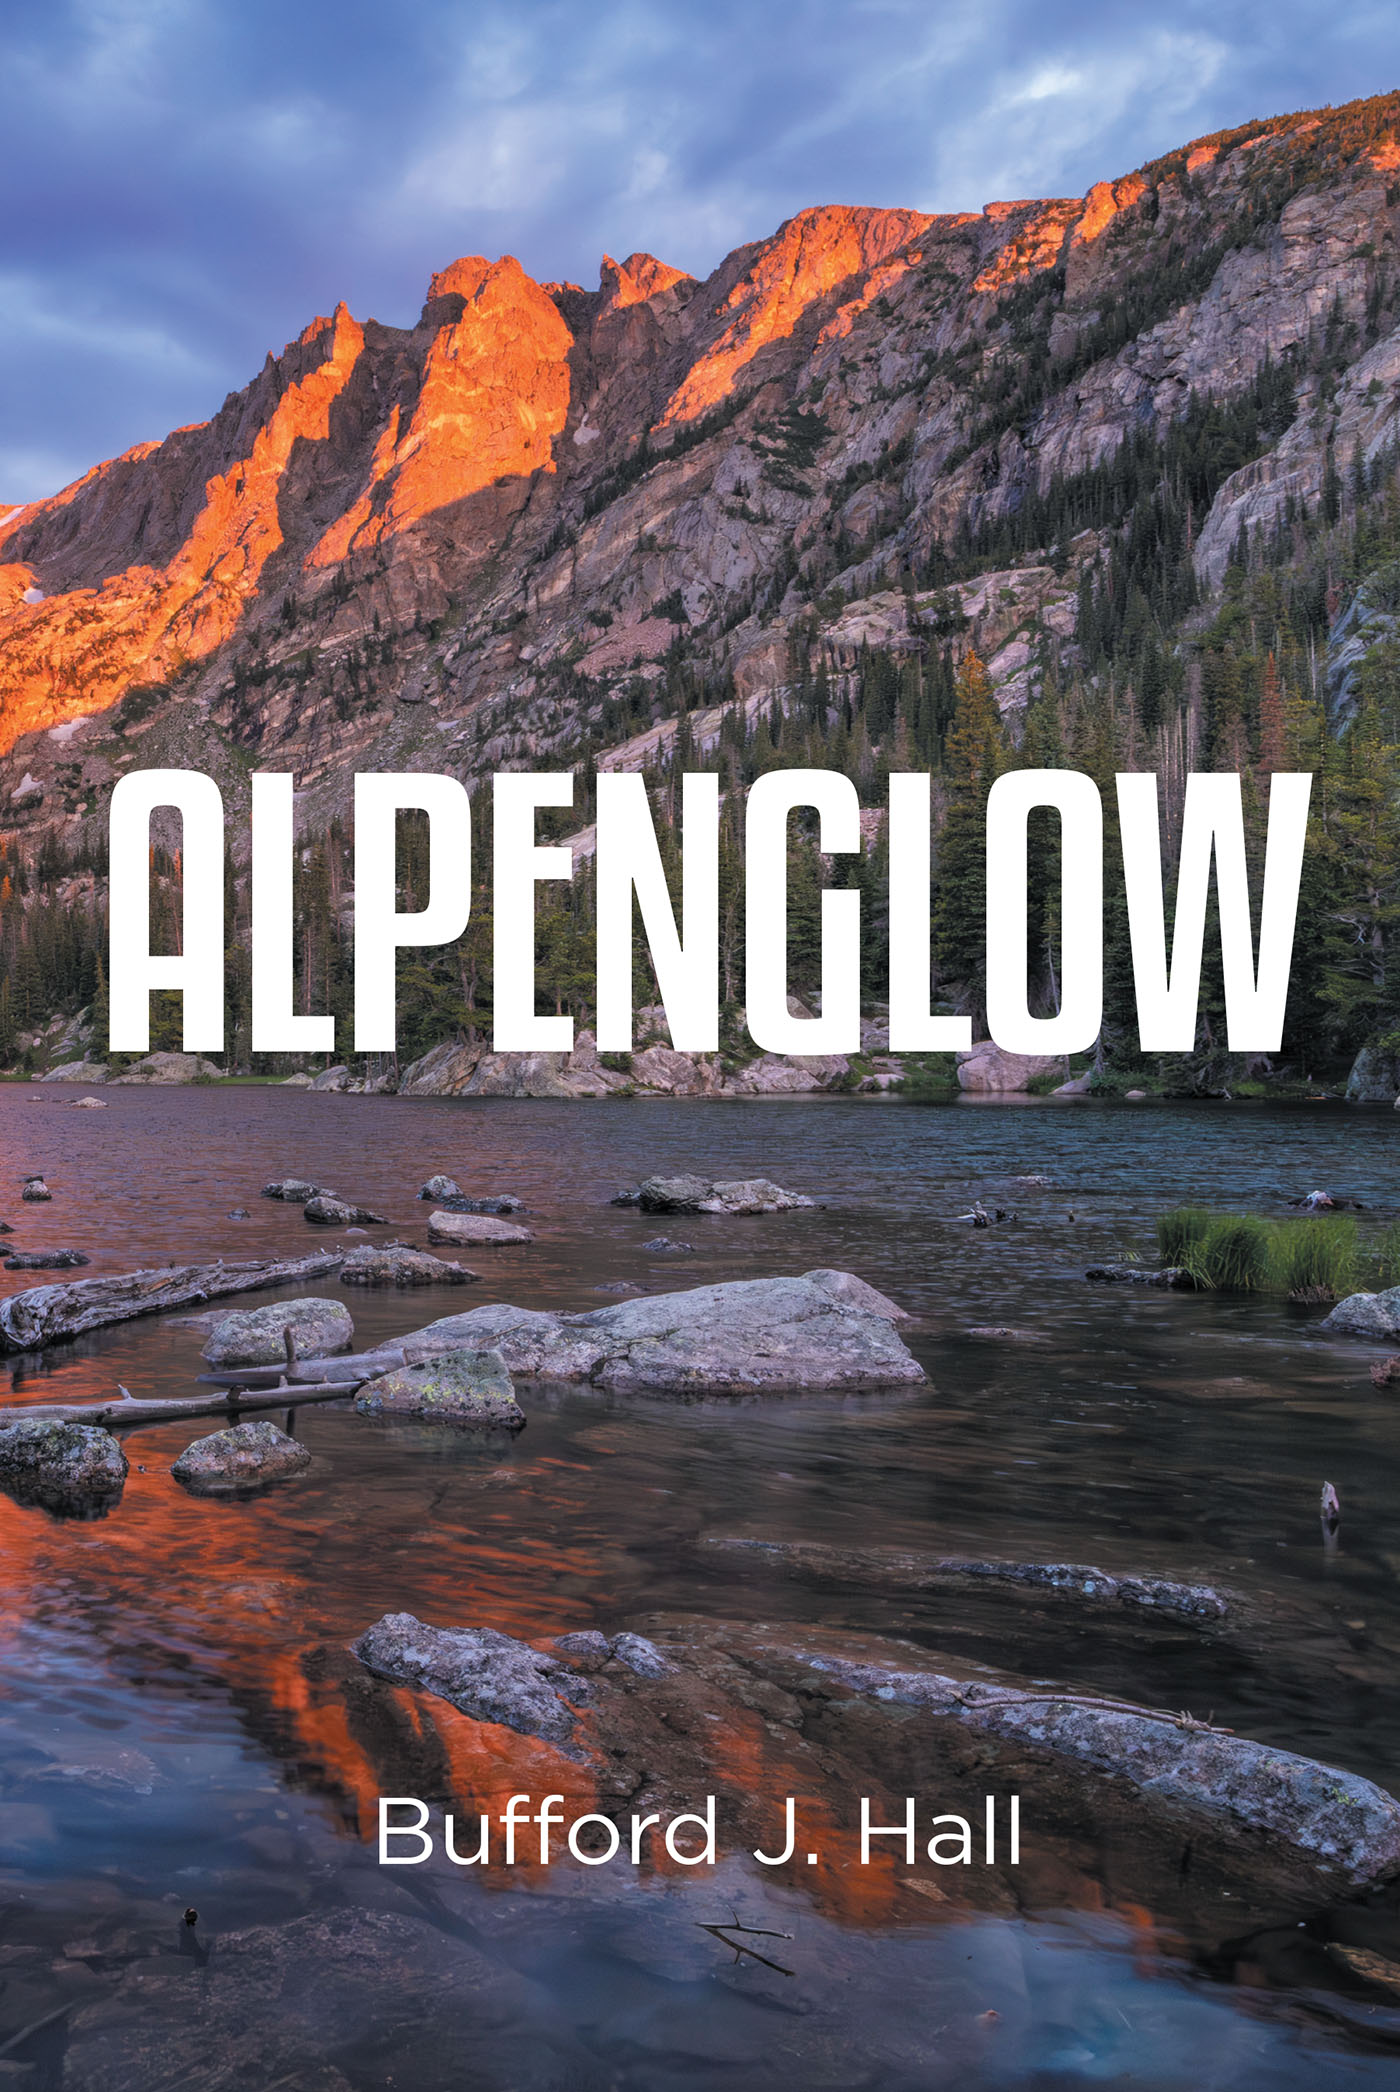 Author Bufford J. Hall’s New Book, "Alpenglow," is a Riveting Series of Poems Exploring the Small, Beautiful Details of Nature, as Well as the Trials and Triumphs of Life